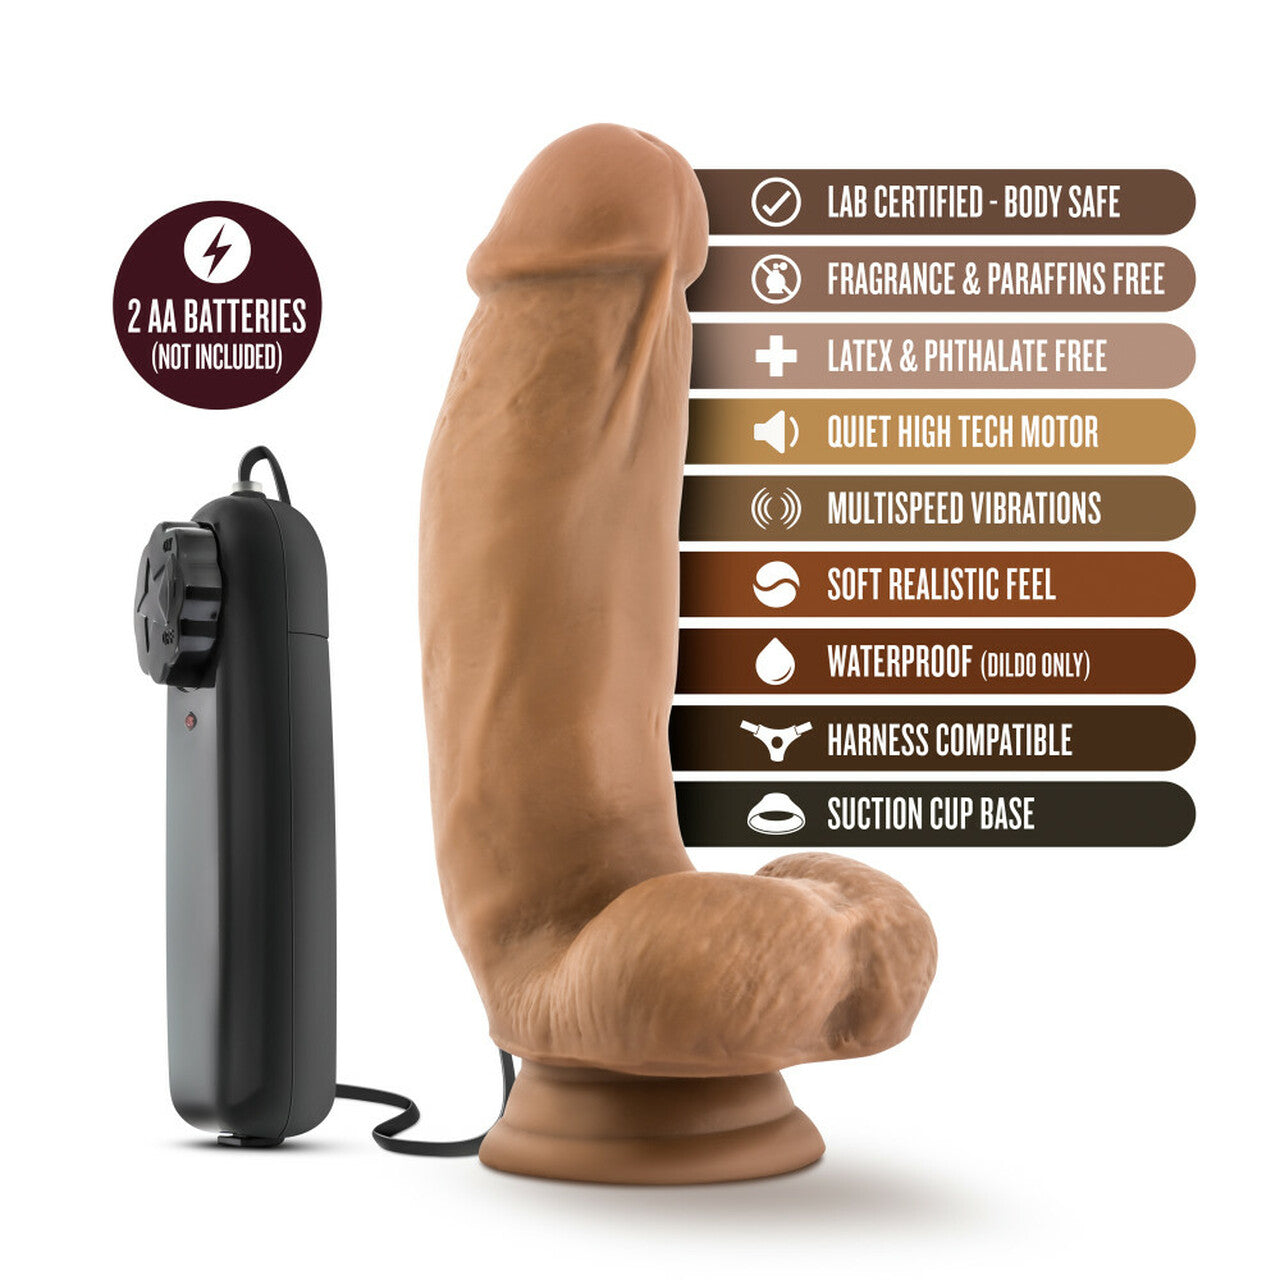 Loverboy MMA Fighter 7 Inch Vibrating Realistic Dildo